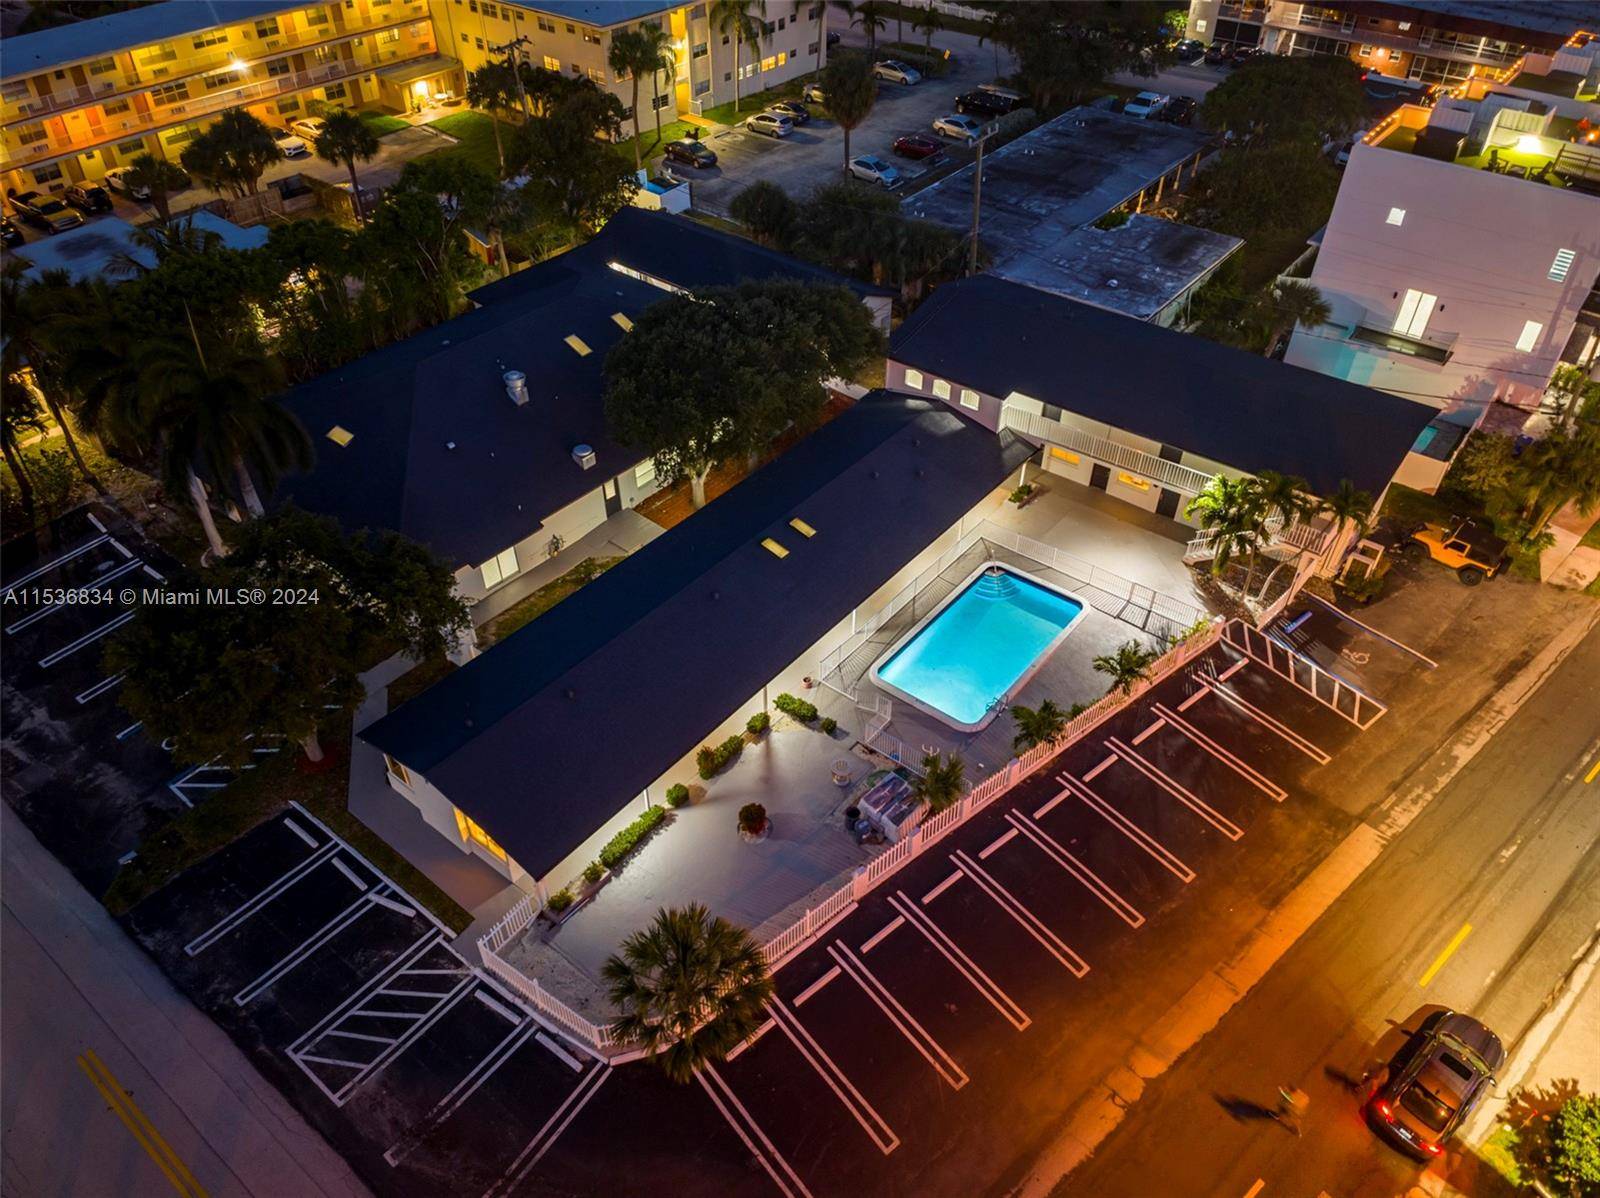 This completely renovated and modernized hotel is located in an extremely desirable vacation area that boasts a true small beach town feel, only one short block from the beach.